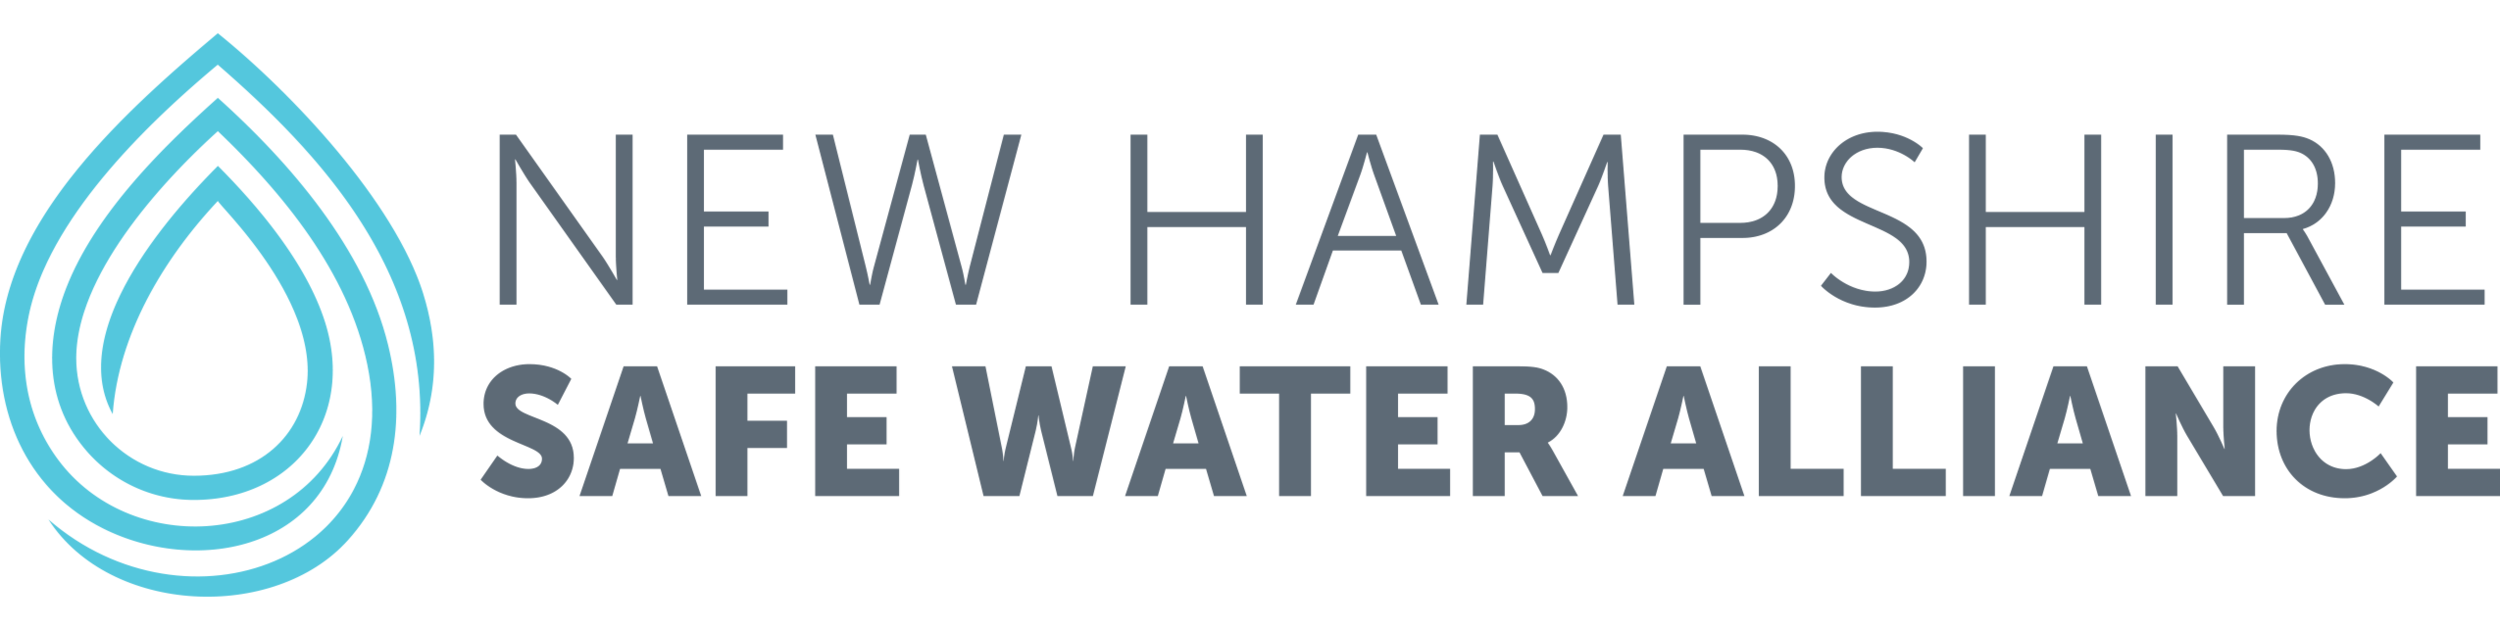 New Hampshire Safe Water Alliance